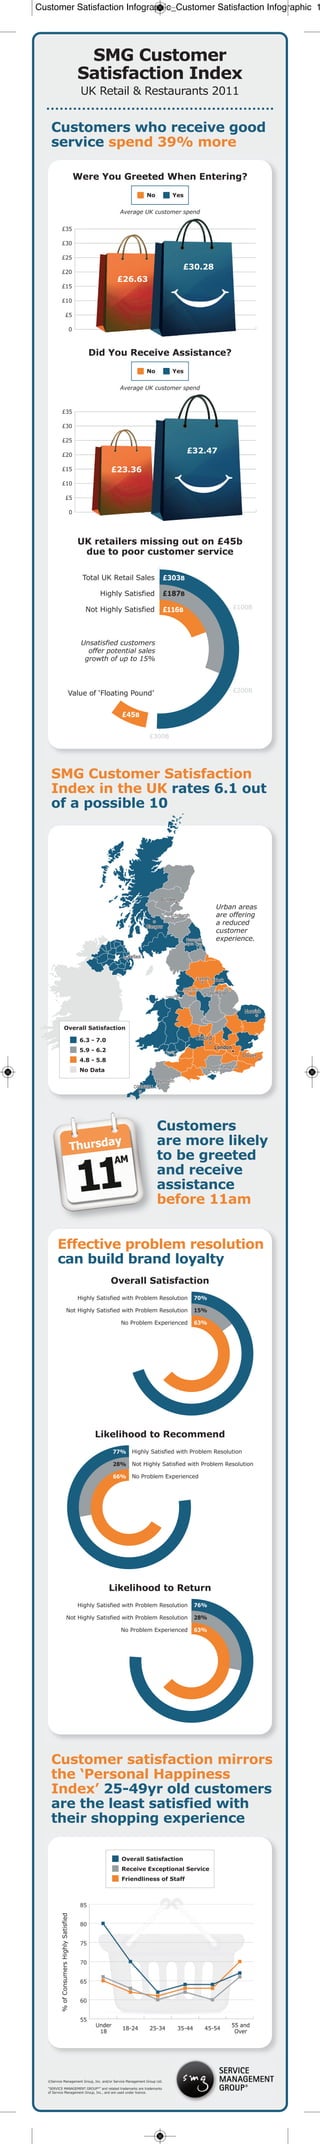 Customer Satisfaction Infographic_Customer Satisfaction Infographic 1




                     SMG Customer
                    Satisfaction Index
                      UK Retail & Restaurants 2011


    Customers who receive good
    service spend 39% more

                   Were You Greeted When Entering?
                                                             No           Yes

                                             Average UK customer spend


           £35

           £30

           £25
                                                                            £30.28
           £20
                                            £26.63
           £15

           £10

             £5

               0



                          Did You Receive Assistance?
                                                             No           Yes

                                             Average UK customer spend



           £35

           £30

           £25

           £20
                                                                                £32.47

           £15                          £23.36
           £10

             £5

               0




                    UK retailers missing out on £45b
                     due to poor customer service




                      Unsatisfied customers
                        offer potential sales
                       growth of up to 15%




    SMG Customer Satisfaction
    Index in the UK rates 6.1 out
    of a possible 10




                                                                                     Urban areas
                                                                                     are offering
                                                                                     a reduced
                                                                                     customer
                                                                                     experience.




            Overall Satisfaction

                     6.3 - 7.0
                     5.9 - 6.2
                     4.8 - 5.8
                     No Data




                                                                   Customers
                                                                   are more likely
                                                                   to be greeted
                                                                   and receive
                                                                   assistance
                                                                   before 11am


        Effective problem resolution
        can build brand loyalty
                                        Overall Satisfaction




                              Likelihood to Recommend




                                       Likelihood to Return




    Customer satisfaction mirrors
    the ‘Personal Happiness
    Index’ 25-49yr old customers
    are the least satisfied with
    their shopping experience

                                              Overall Satisfaction
                                              Receive Exceptional Service
                                              Friendliness of Staff




   ©Service Management Group, Inc. and/or Service Management Group Ltd.

   “SERVICE MANAGEMENT GROUP®” and related trademarks are trademarks
   of Service Management Group, Inc., and are used under licence.
 